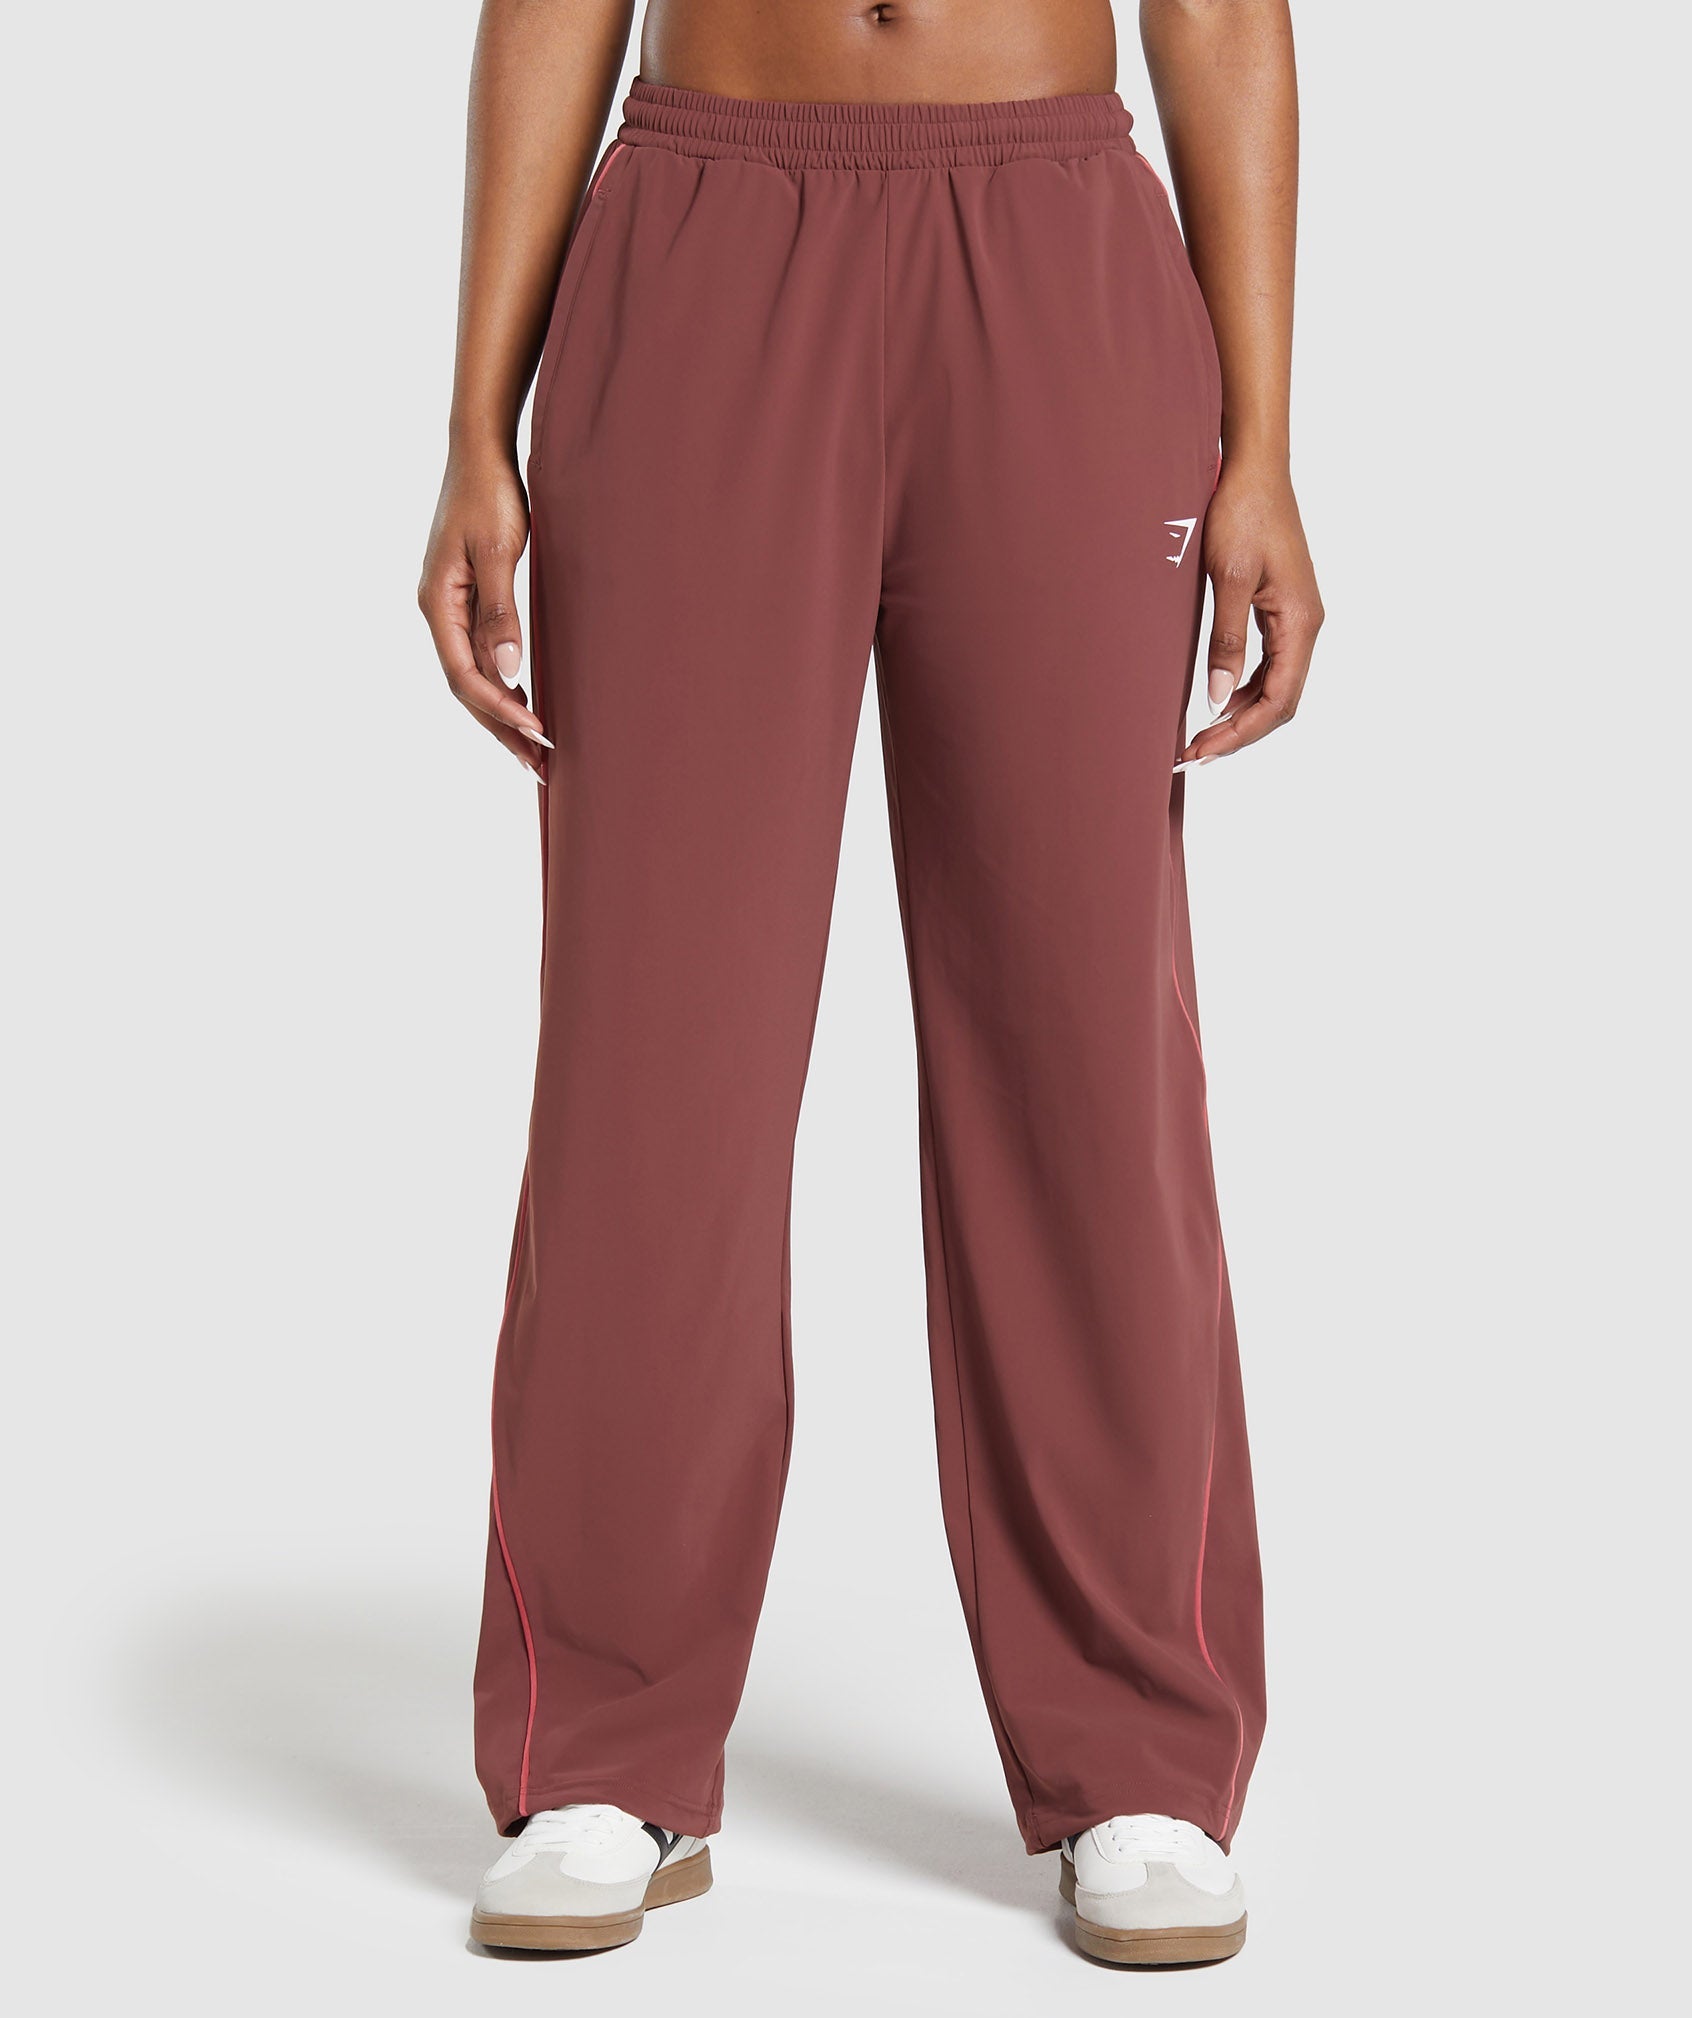 Stitch Feature Woven Pants in Burgundy Brown - view 1